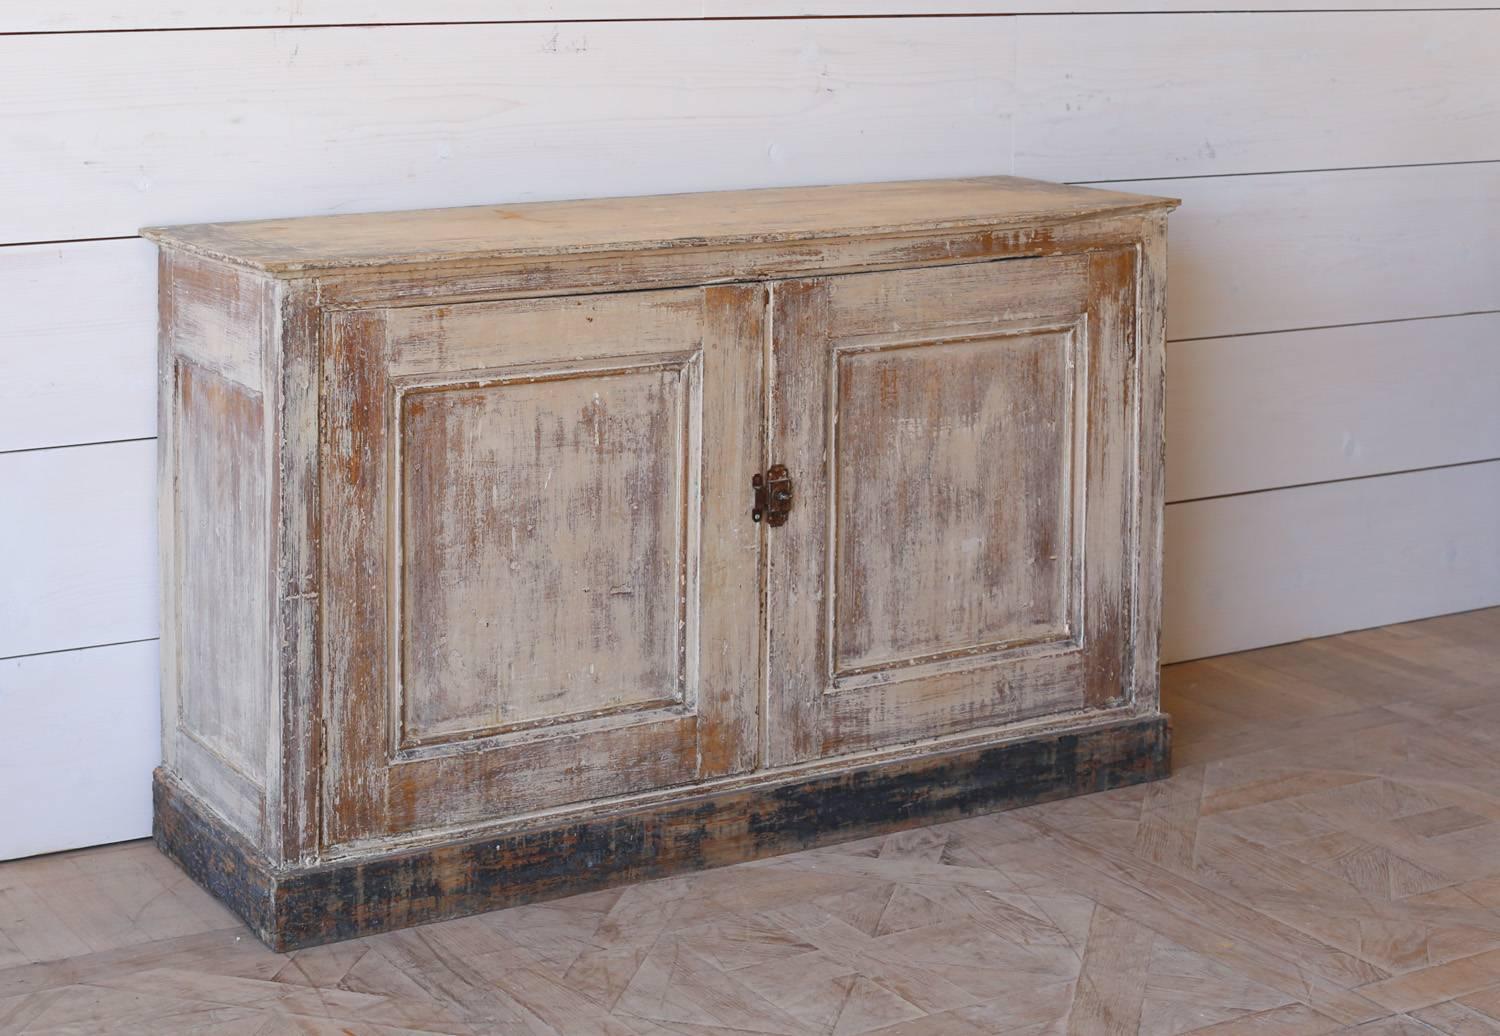 Charming antique cabinet from Le Moulin a Vent in Provence. Cafe au Lait in color, rubbed back to a natural wood finish sitting upon a heavily distressed black bottom. Two cabinet doors open to a single shelf with plenty of storage.